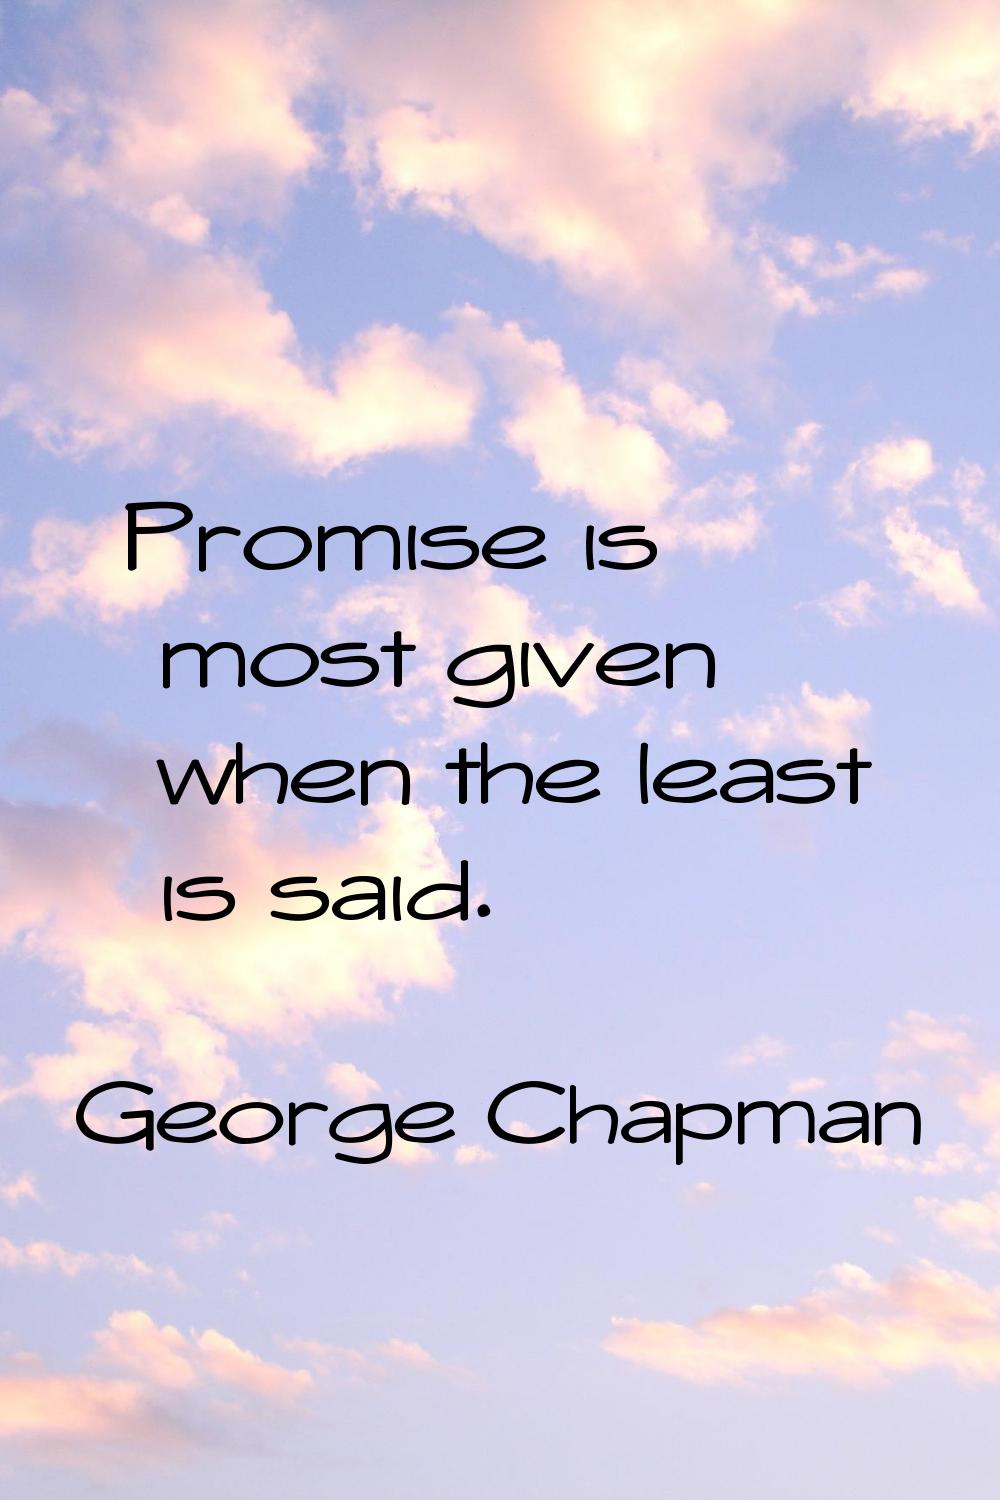 Promise is most given when the least is said.